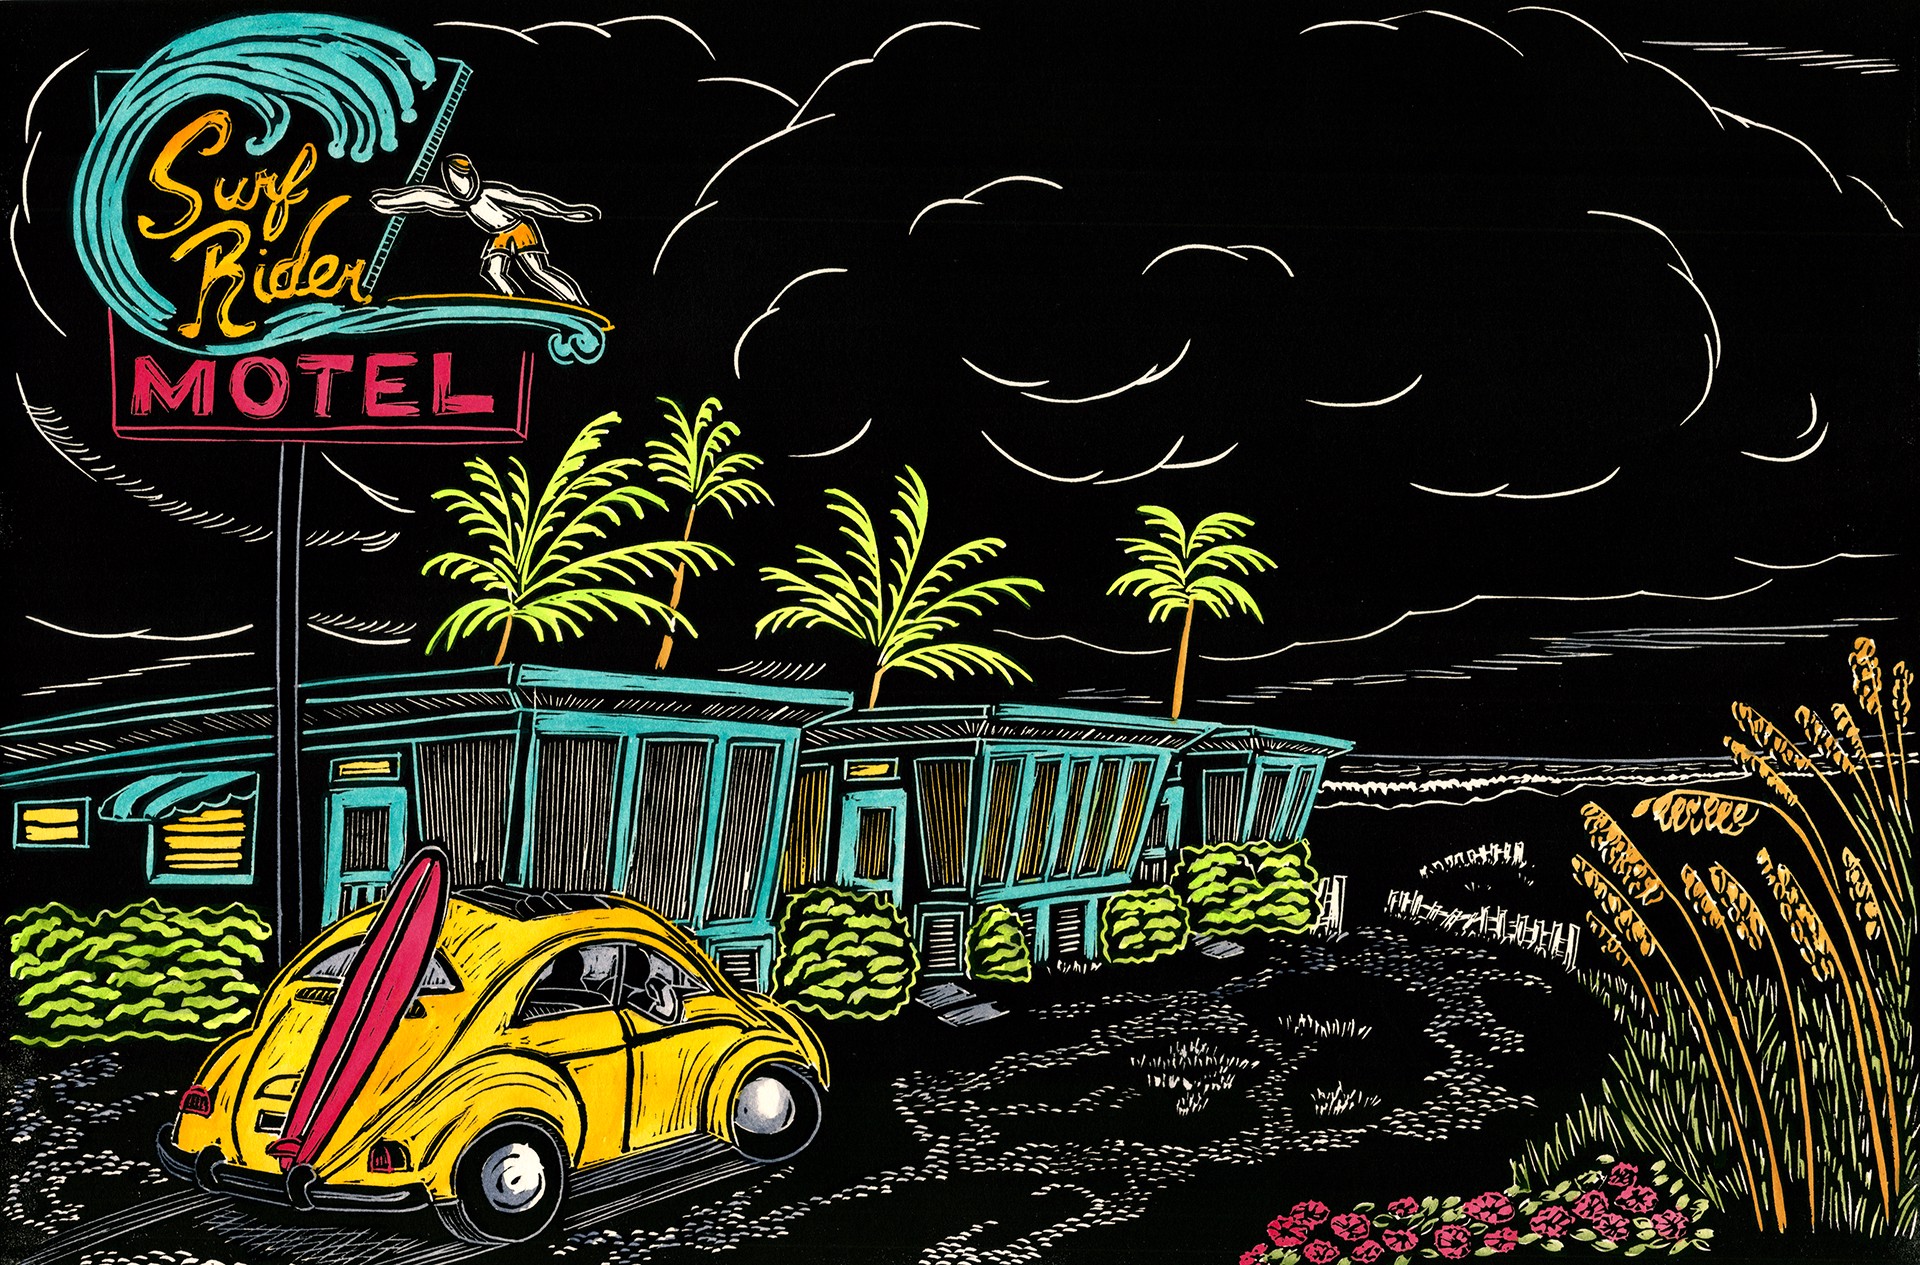 Surf Rider Motel (Late Arrival) by Diana Tonnessen